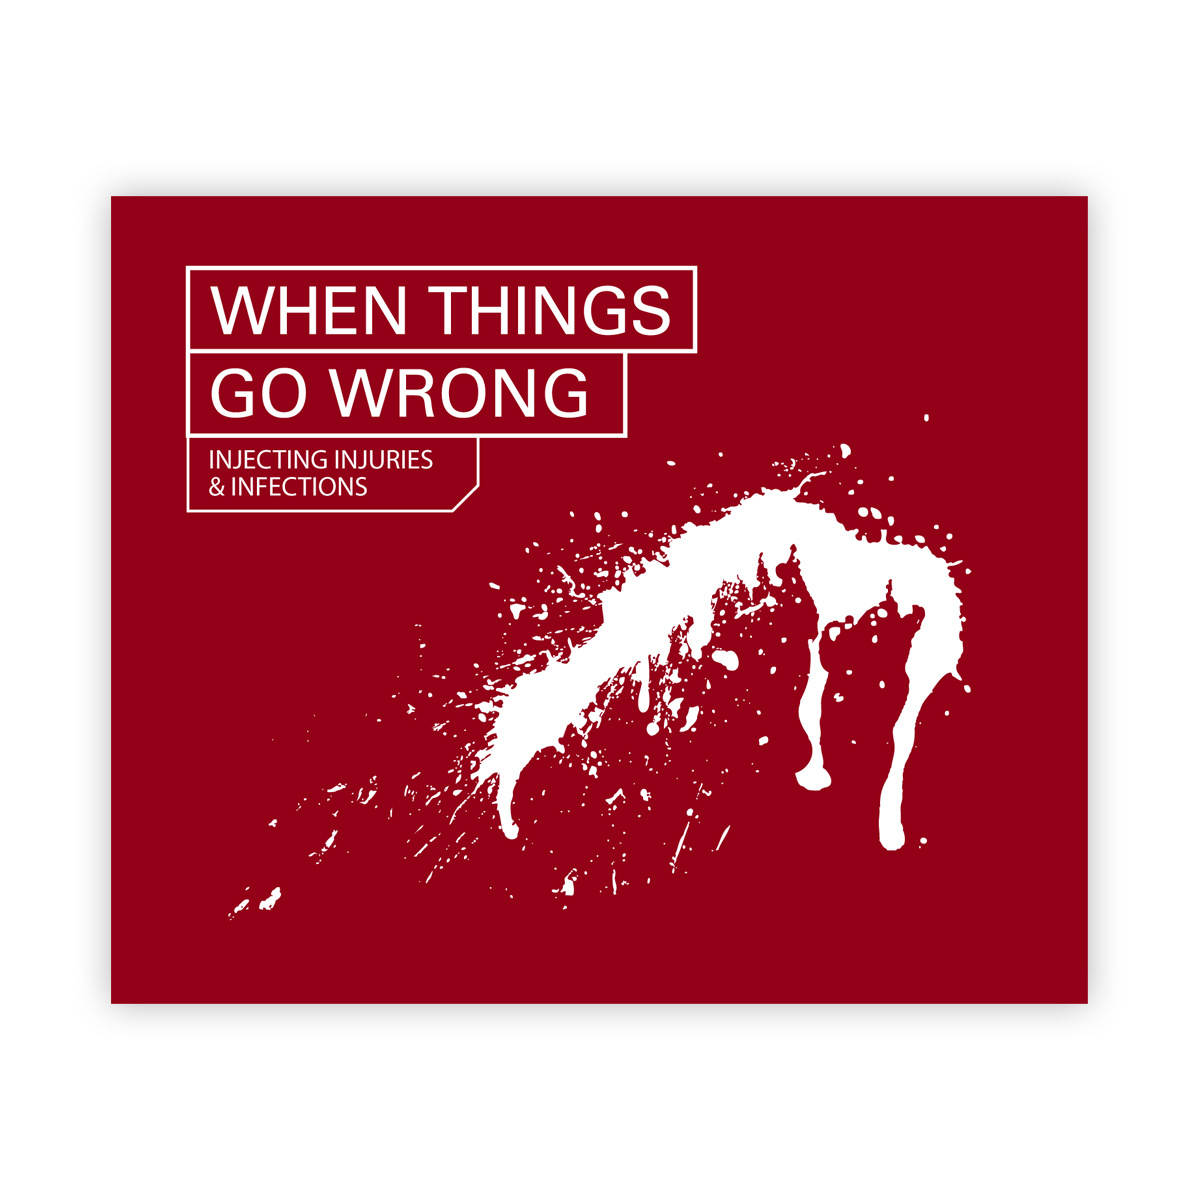 When things go wrong